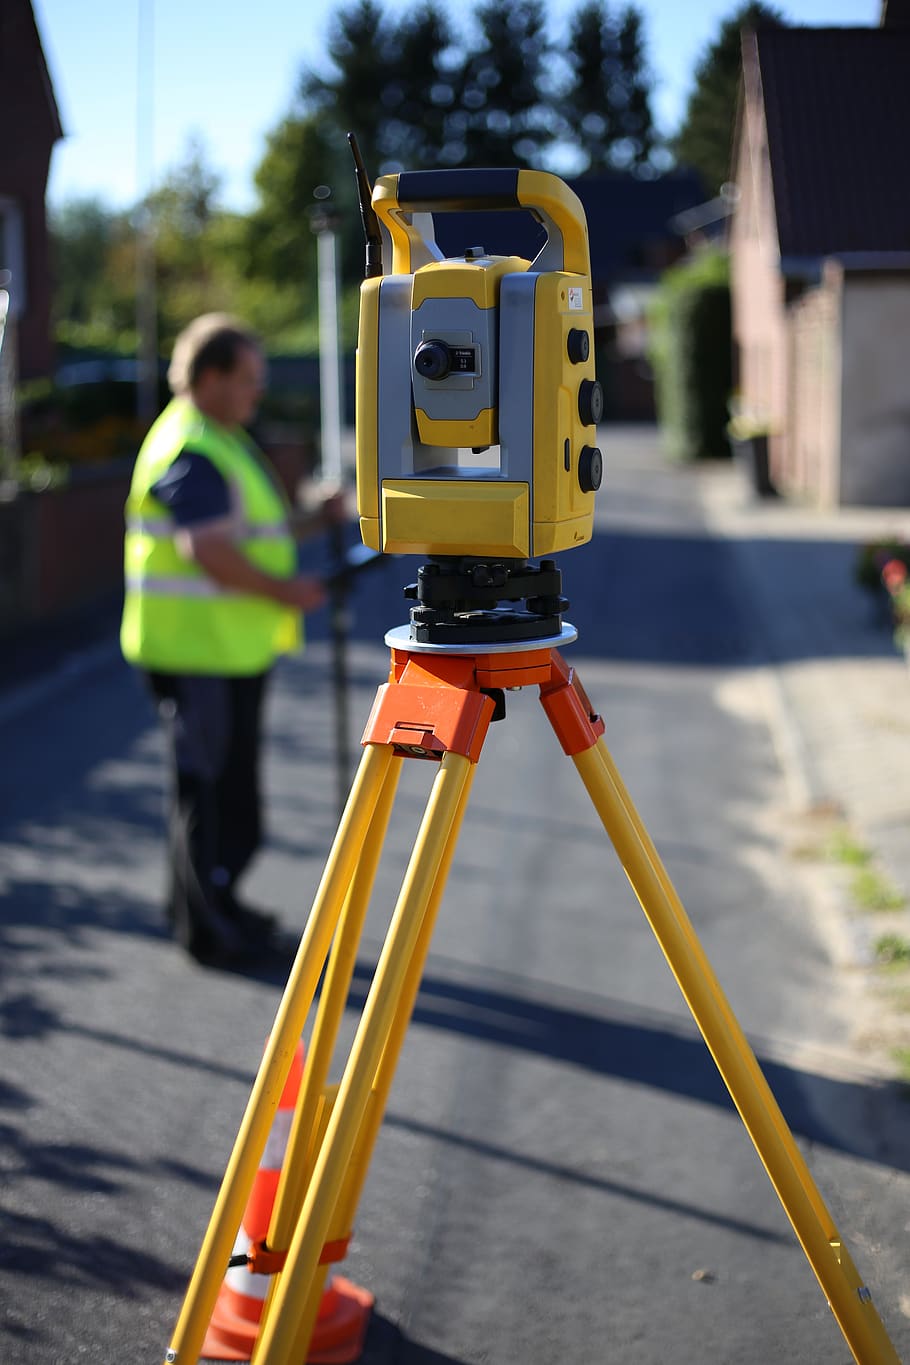 surveying, geodesy, equipment, instrument, land surveyor, stakeout, reflective clothing, yellow, one person, safety